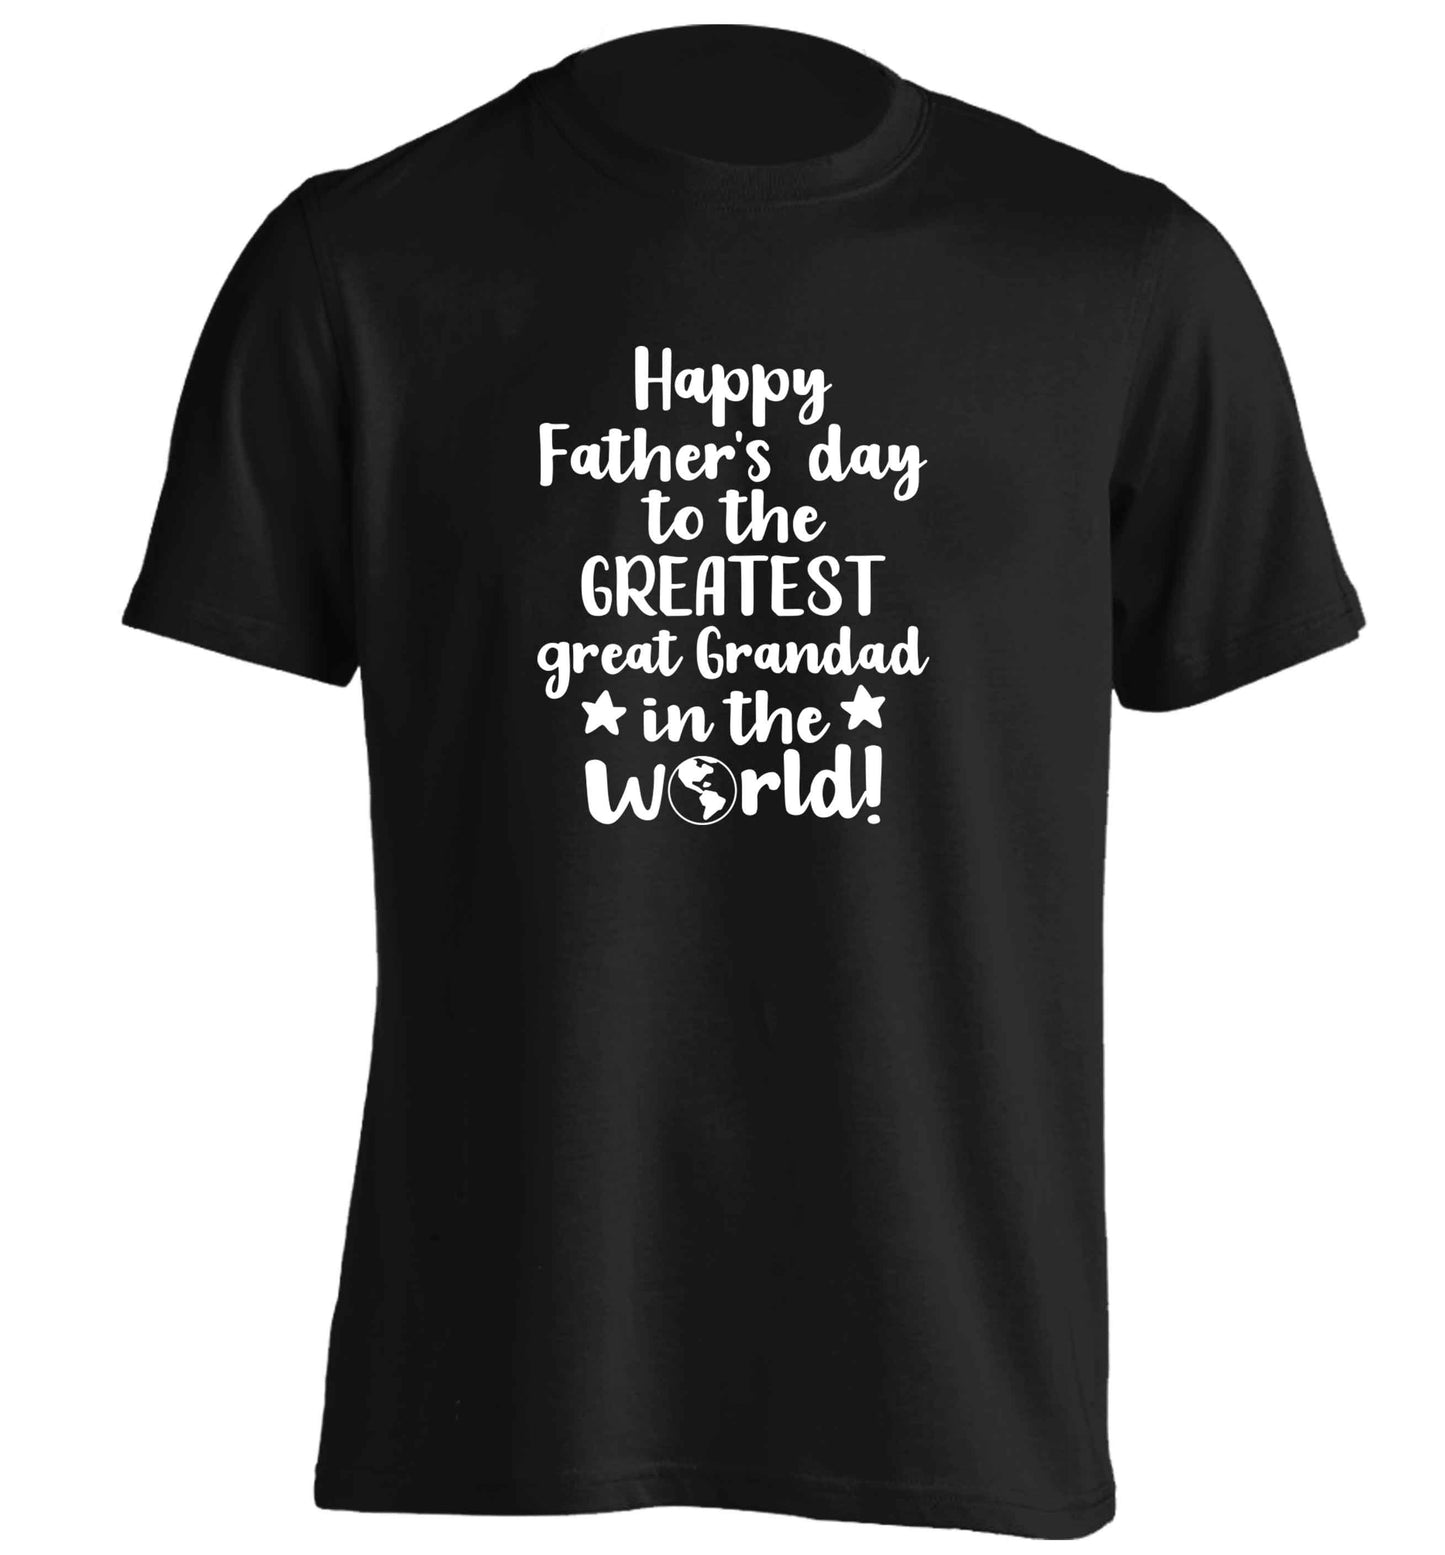 Happy Father's day to the greatest great grandad in the world adults unisex black Tshirt 2XL